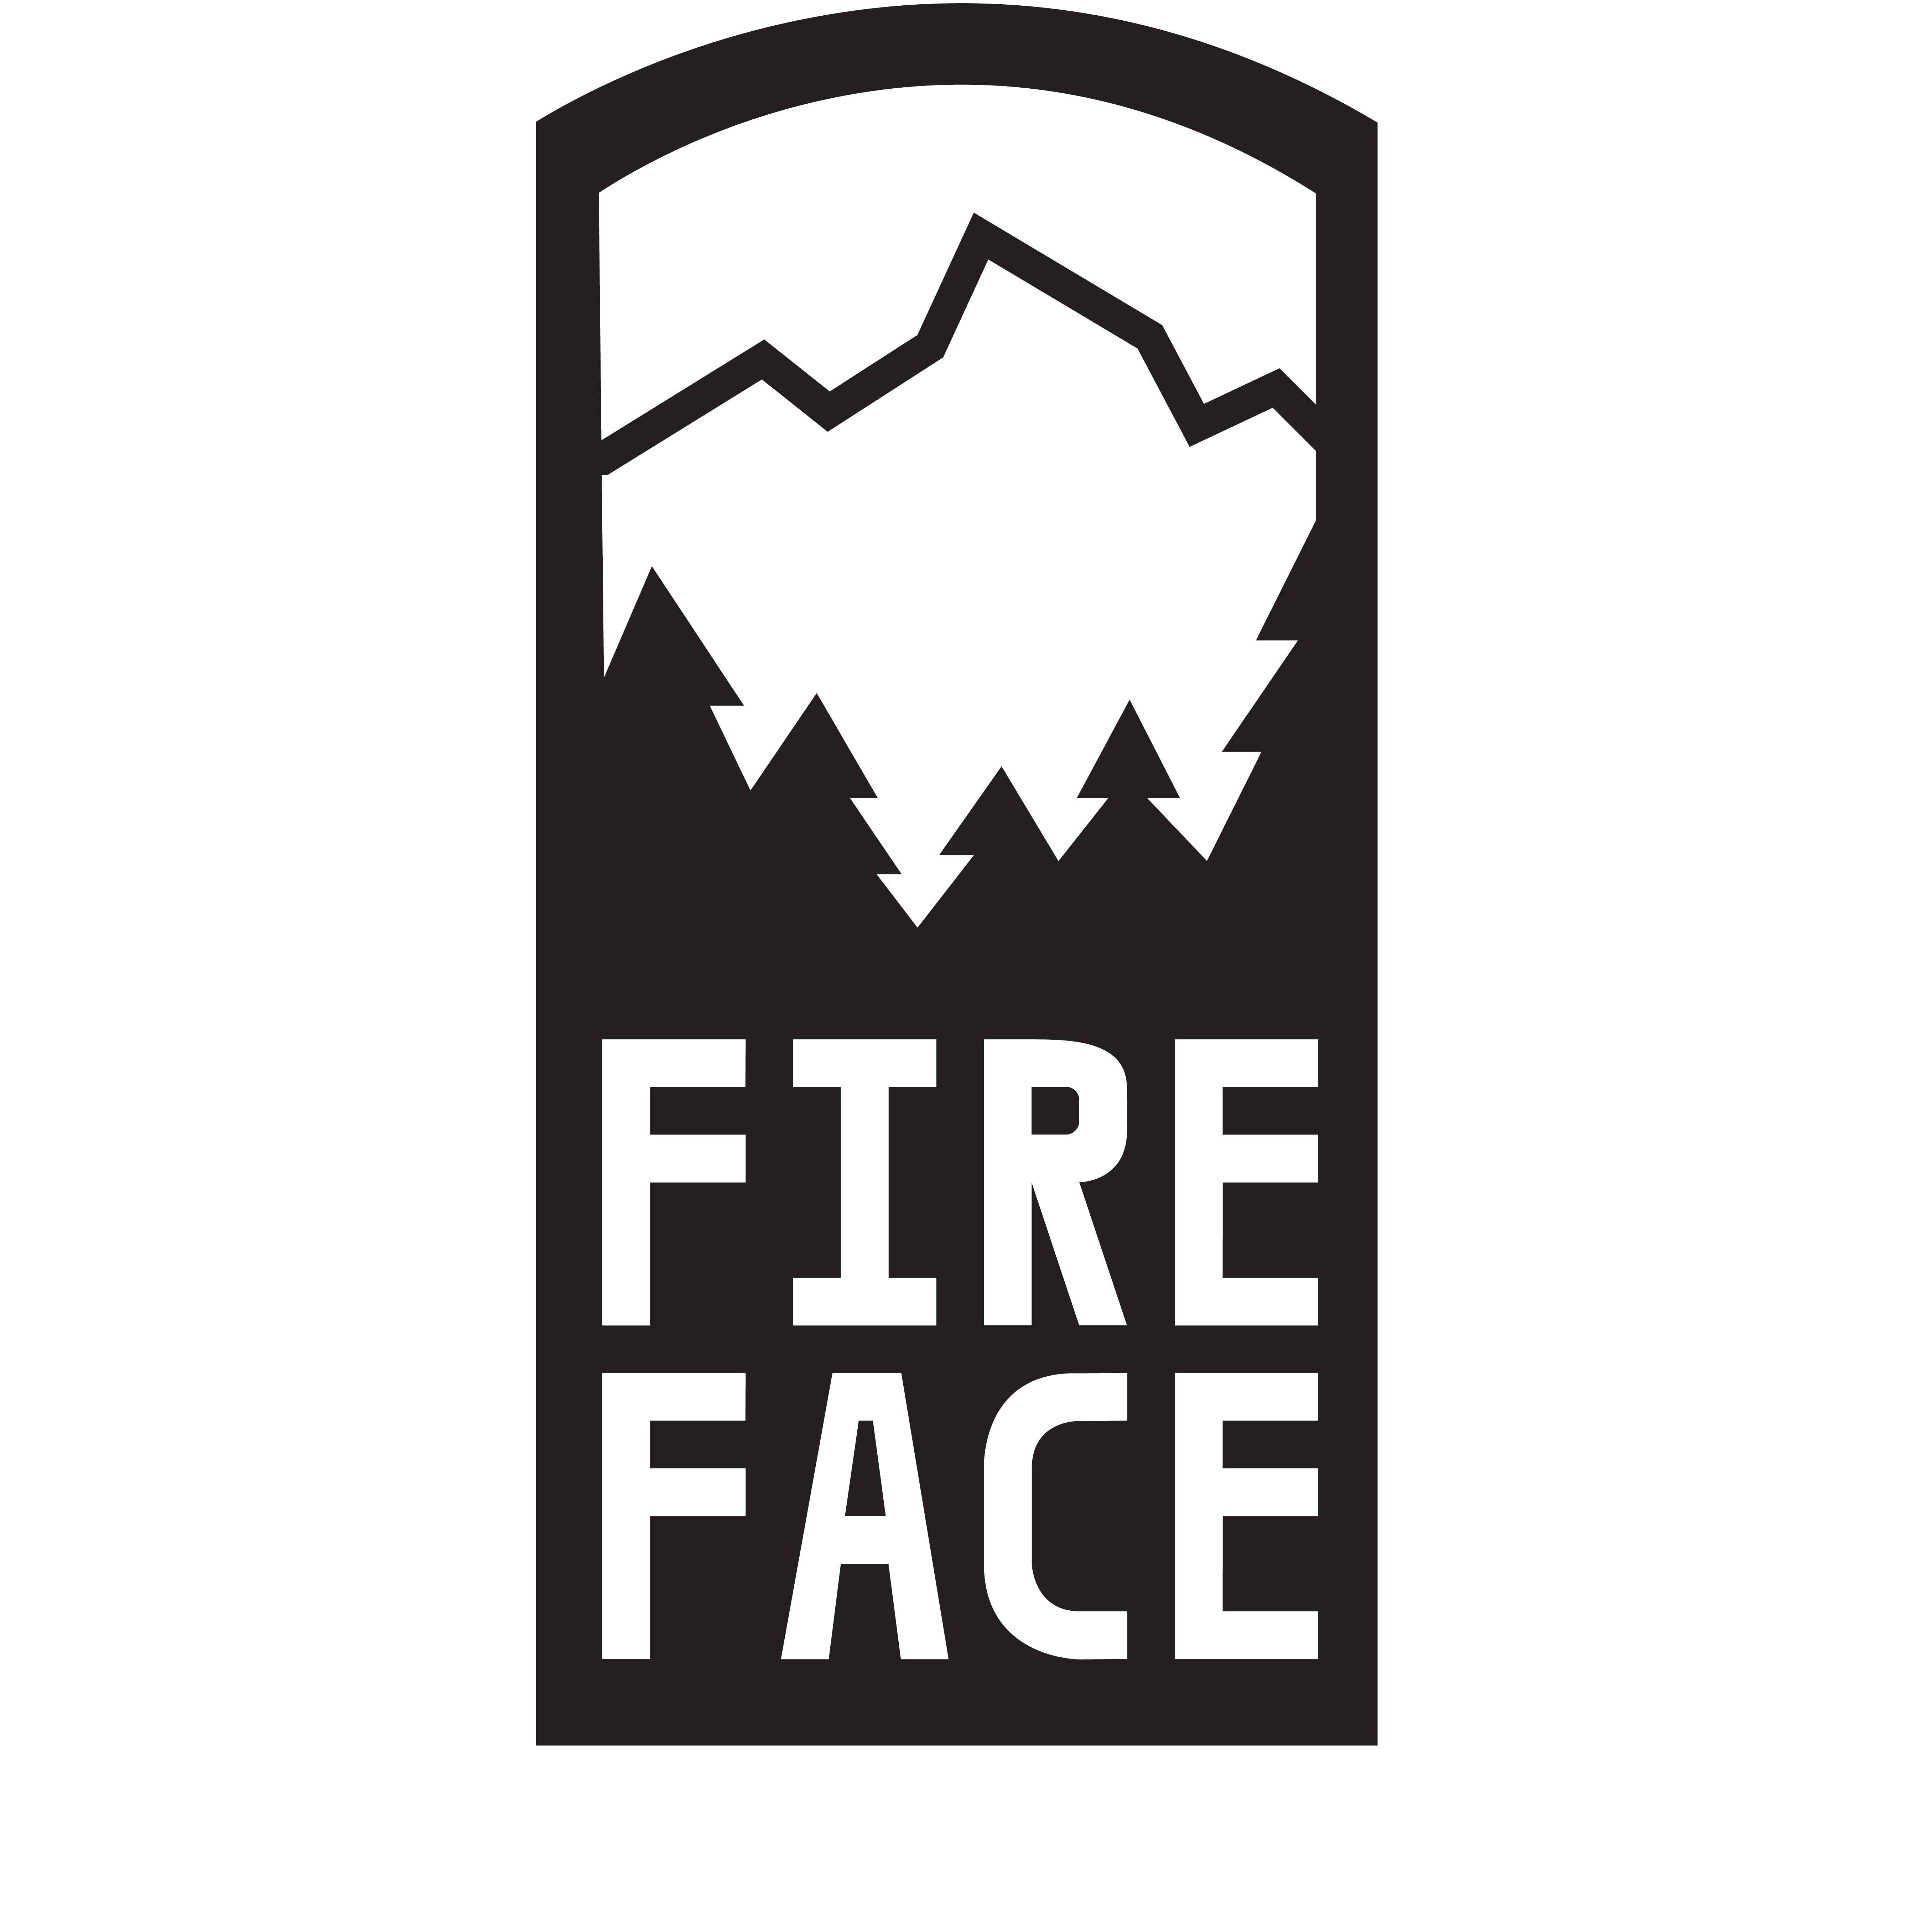 Image of the new Fire Face logo